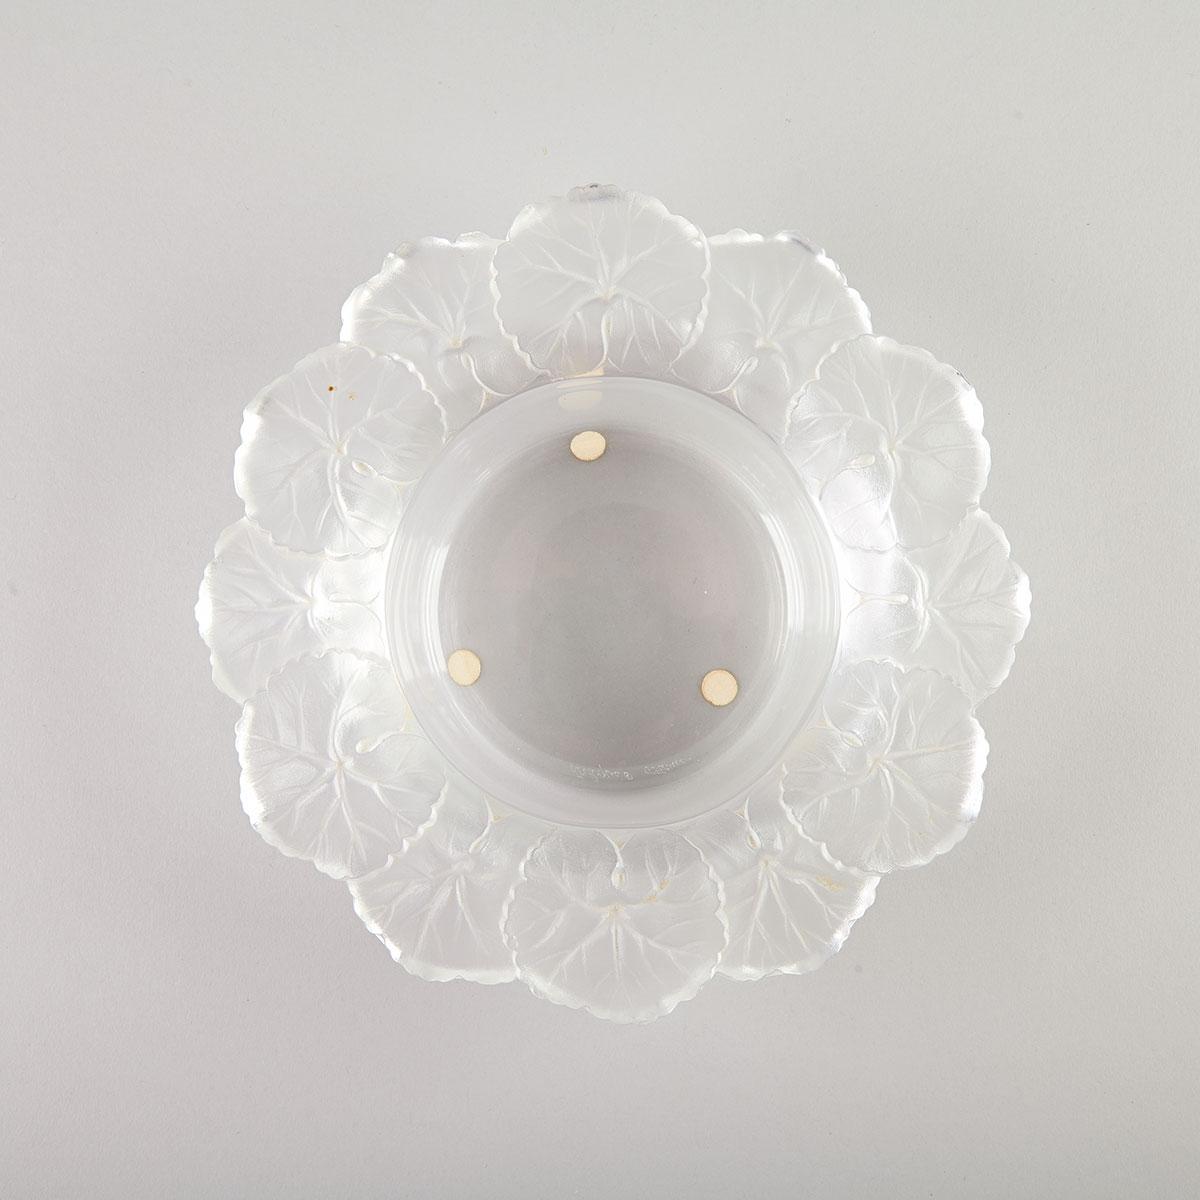 ‘Honfleur’, Lalique Moulded and Partly Frosted Glass Bowl, post-1960